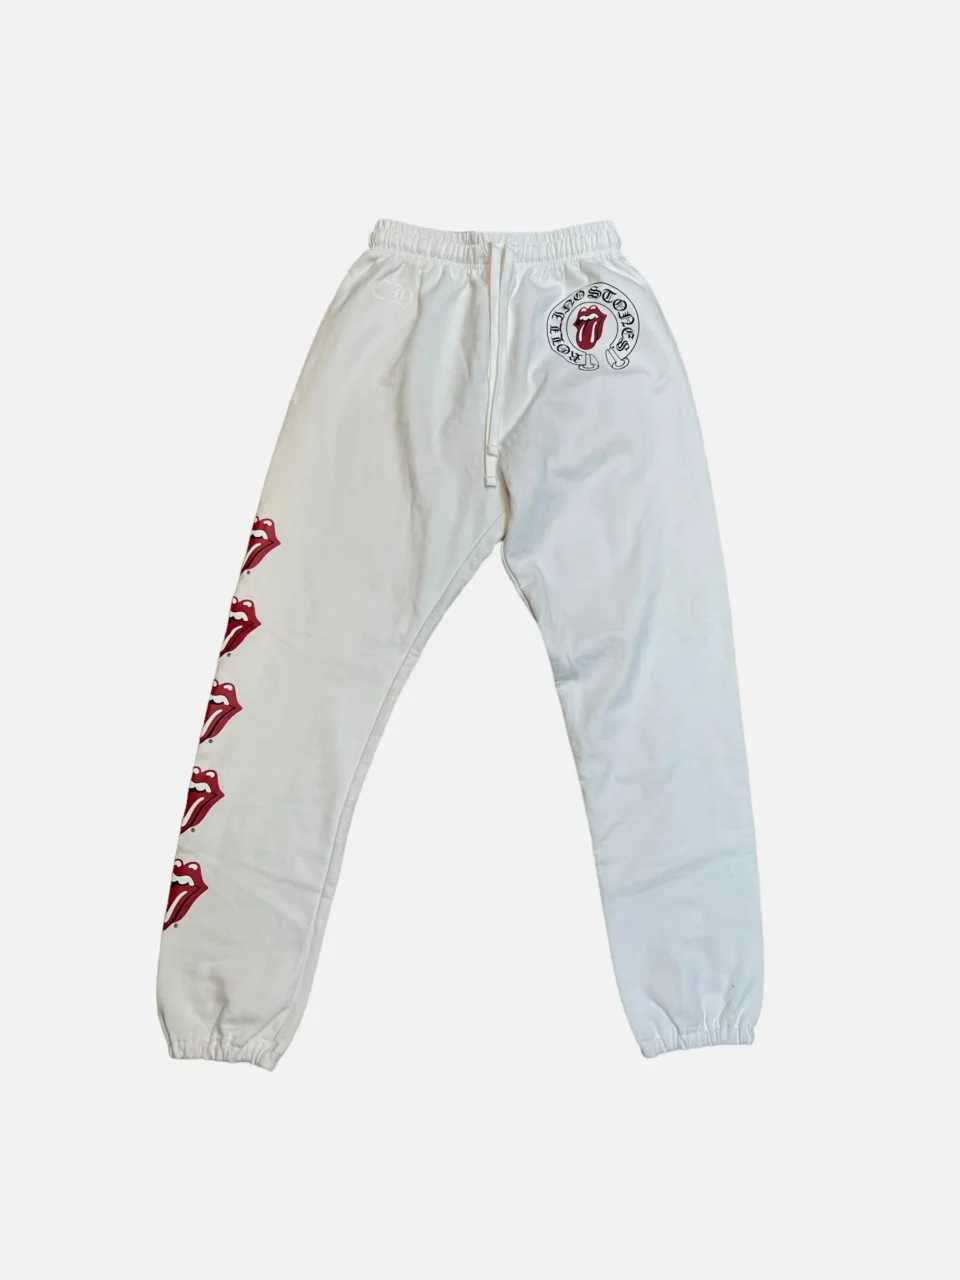 Chrome Hearts Rolling Stones Sweatpants Front side image